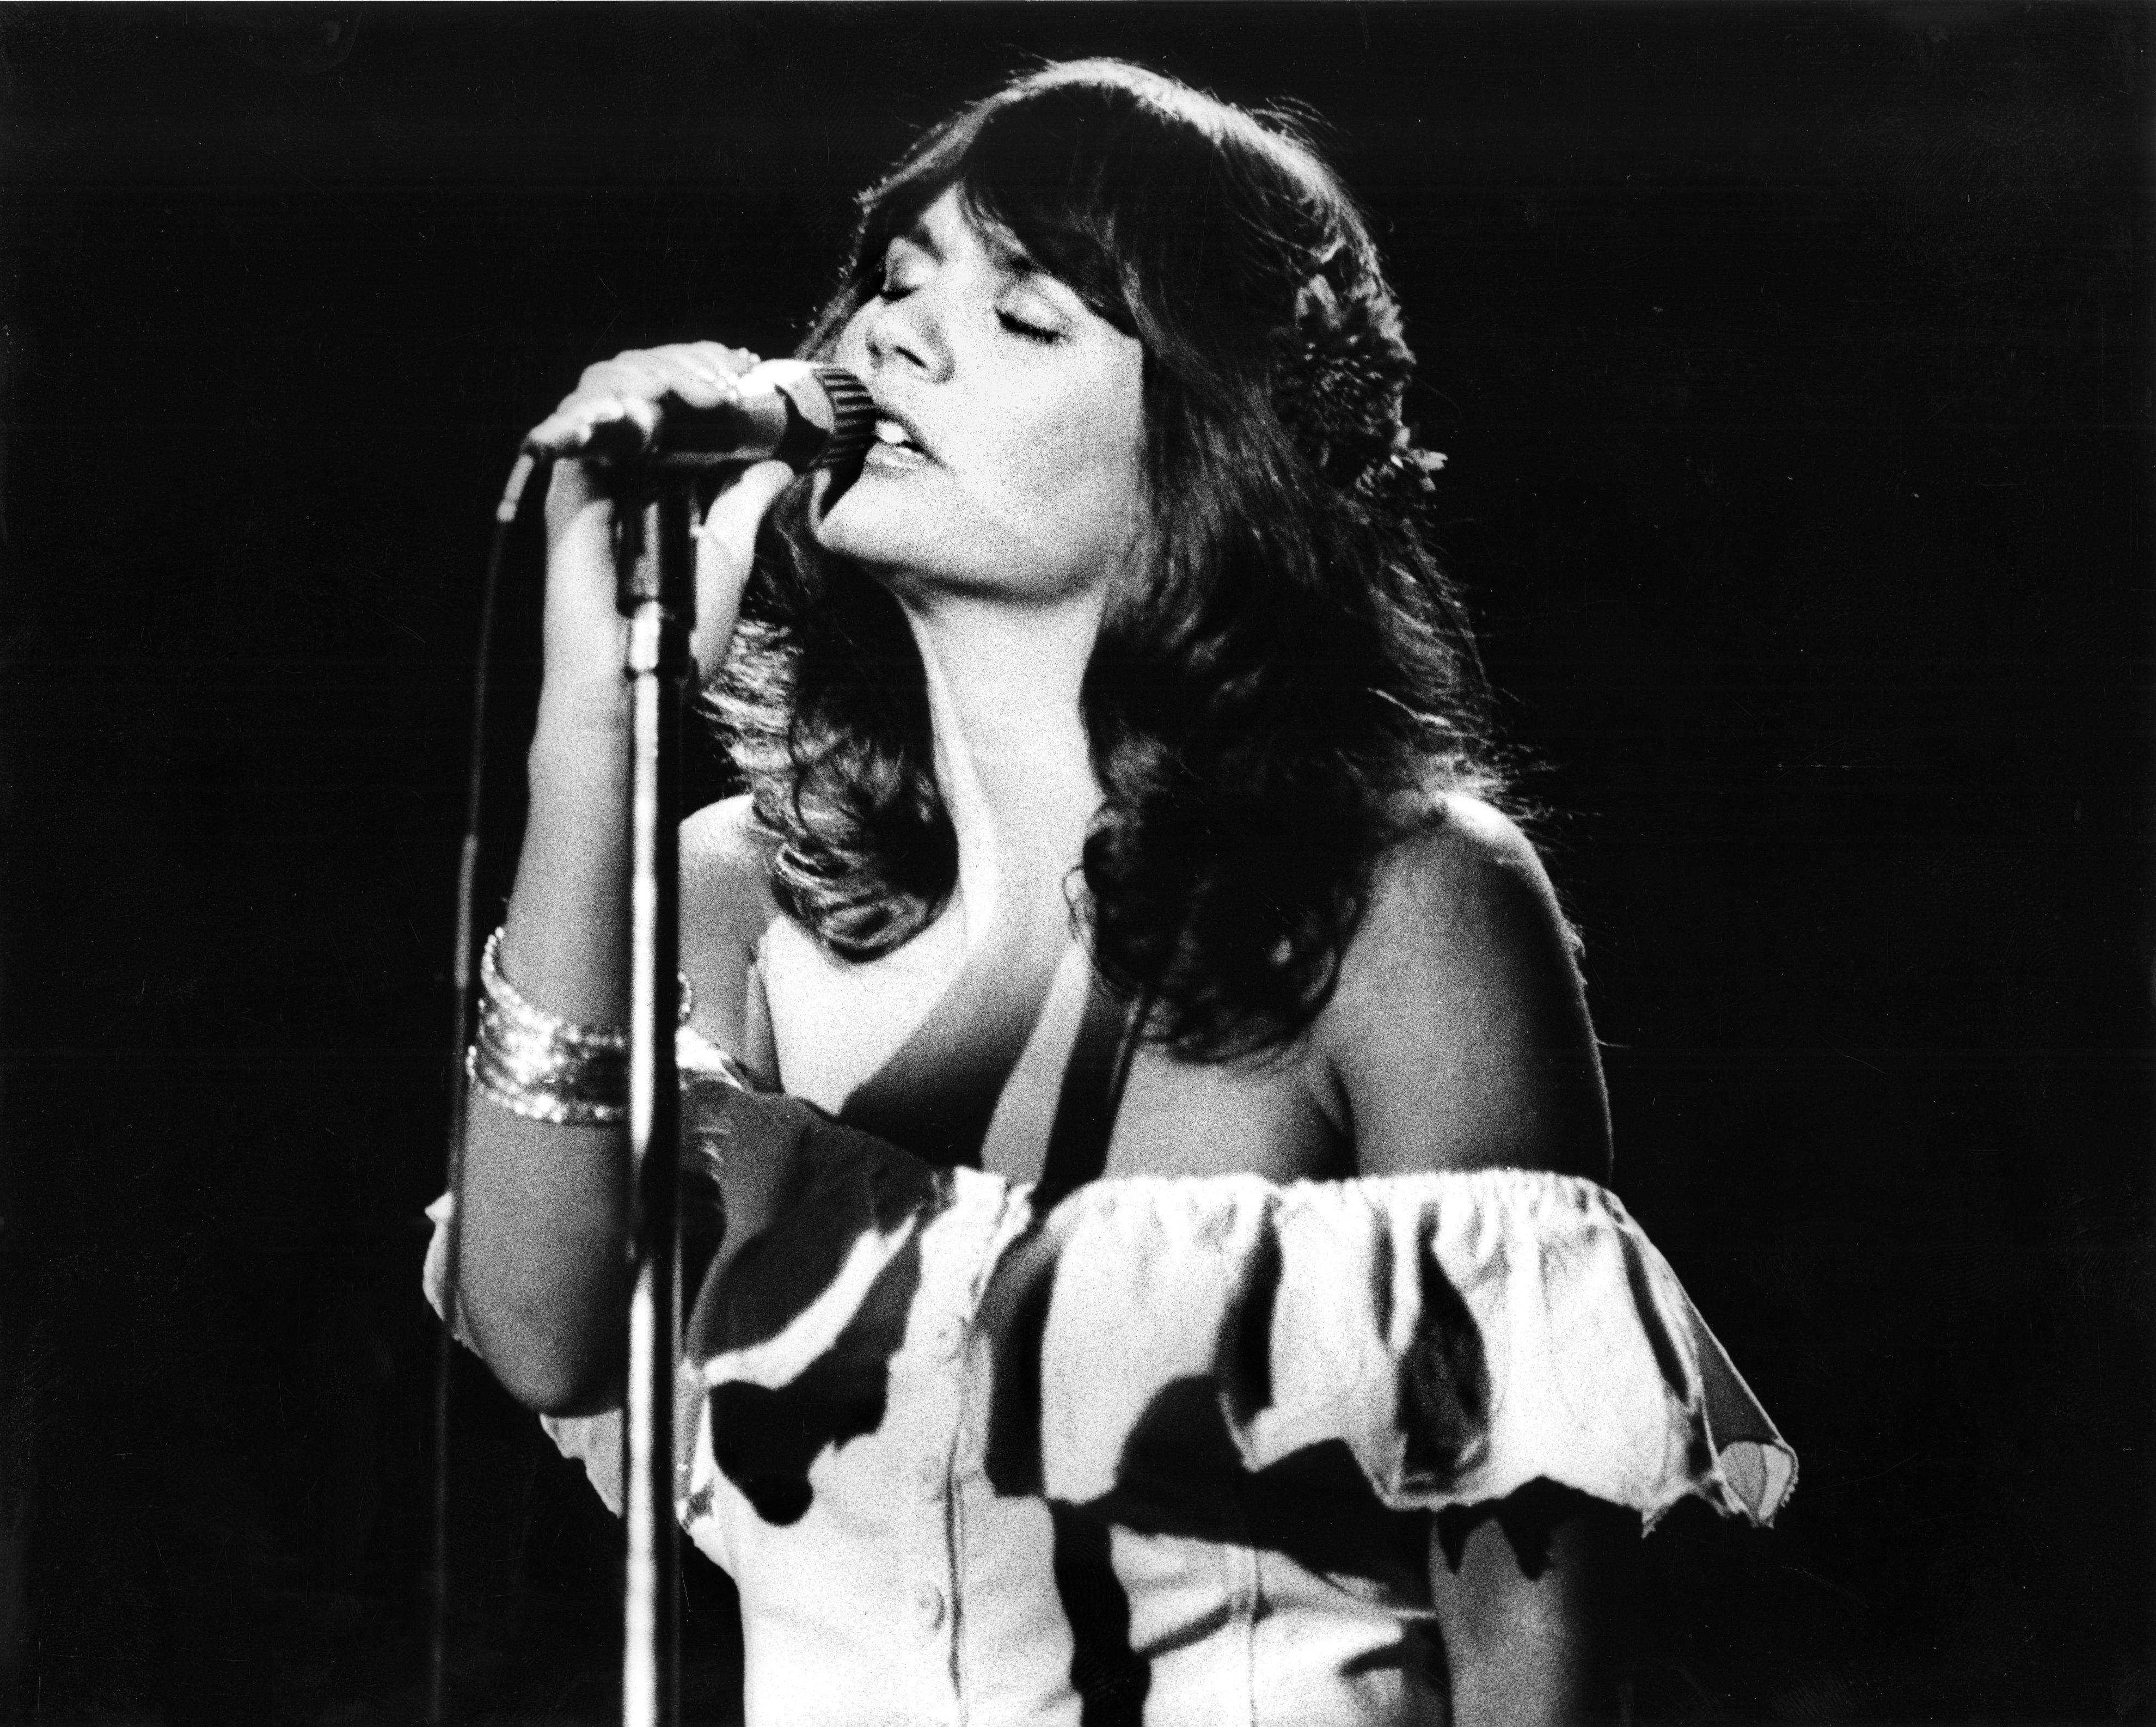 Linda Ronstadt performs live in Amsterdam, Netherlands, in 1976 | Source: Getty Images